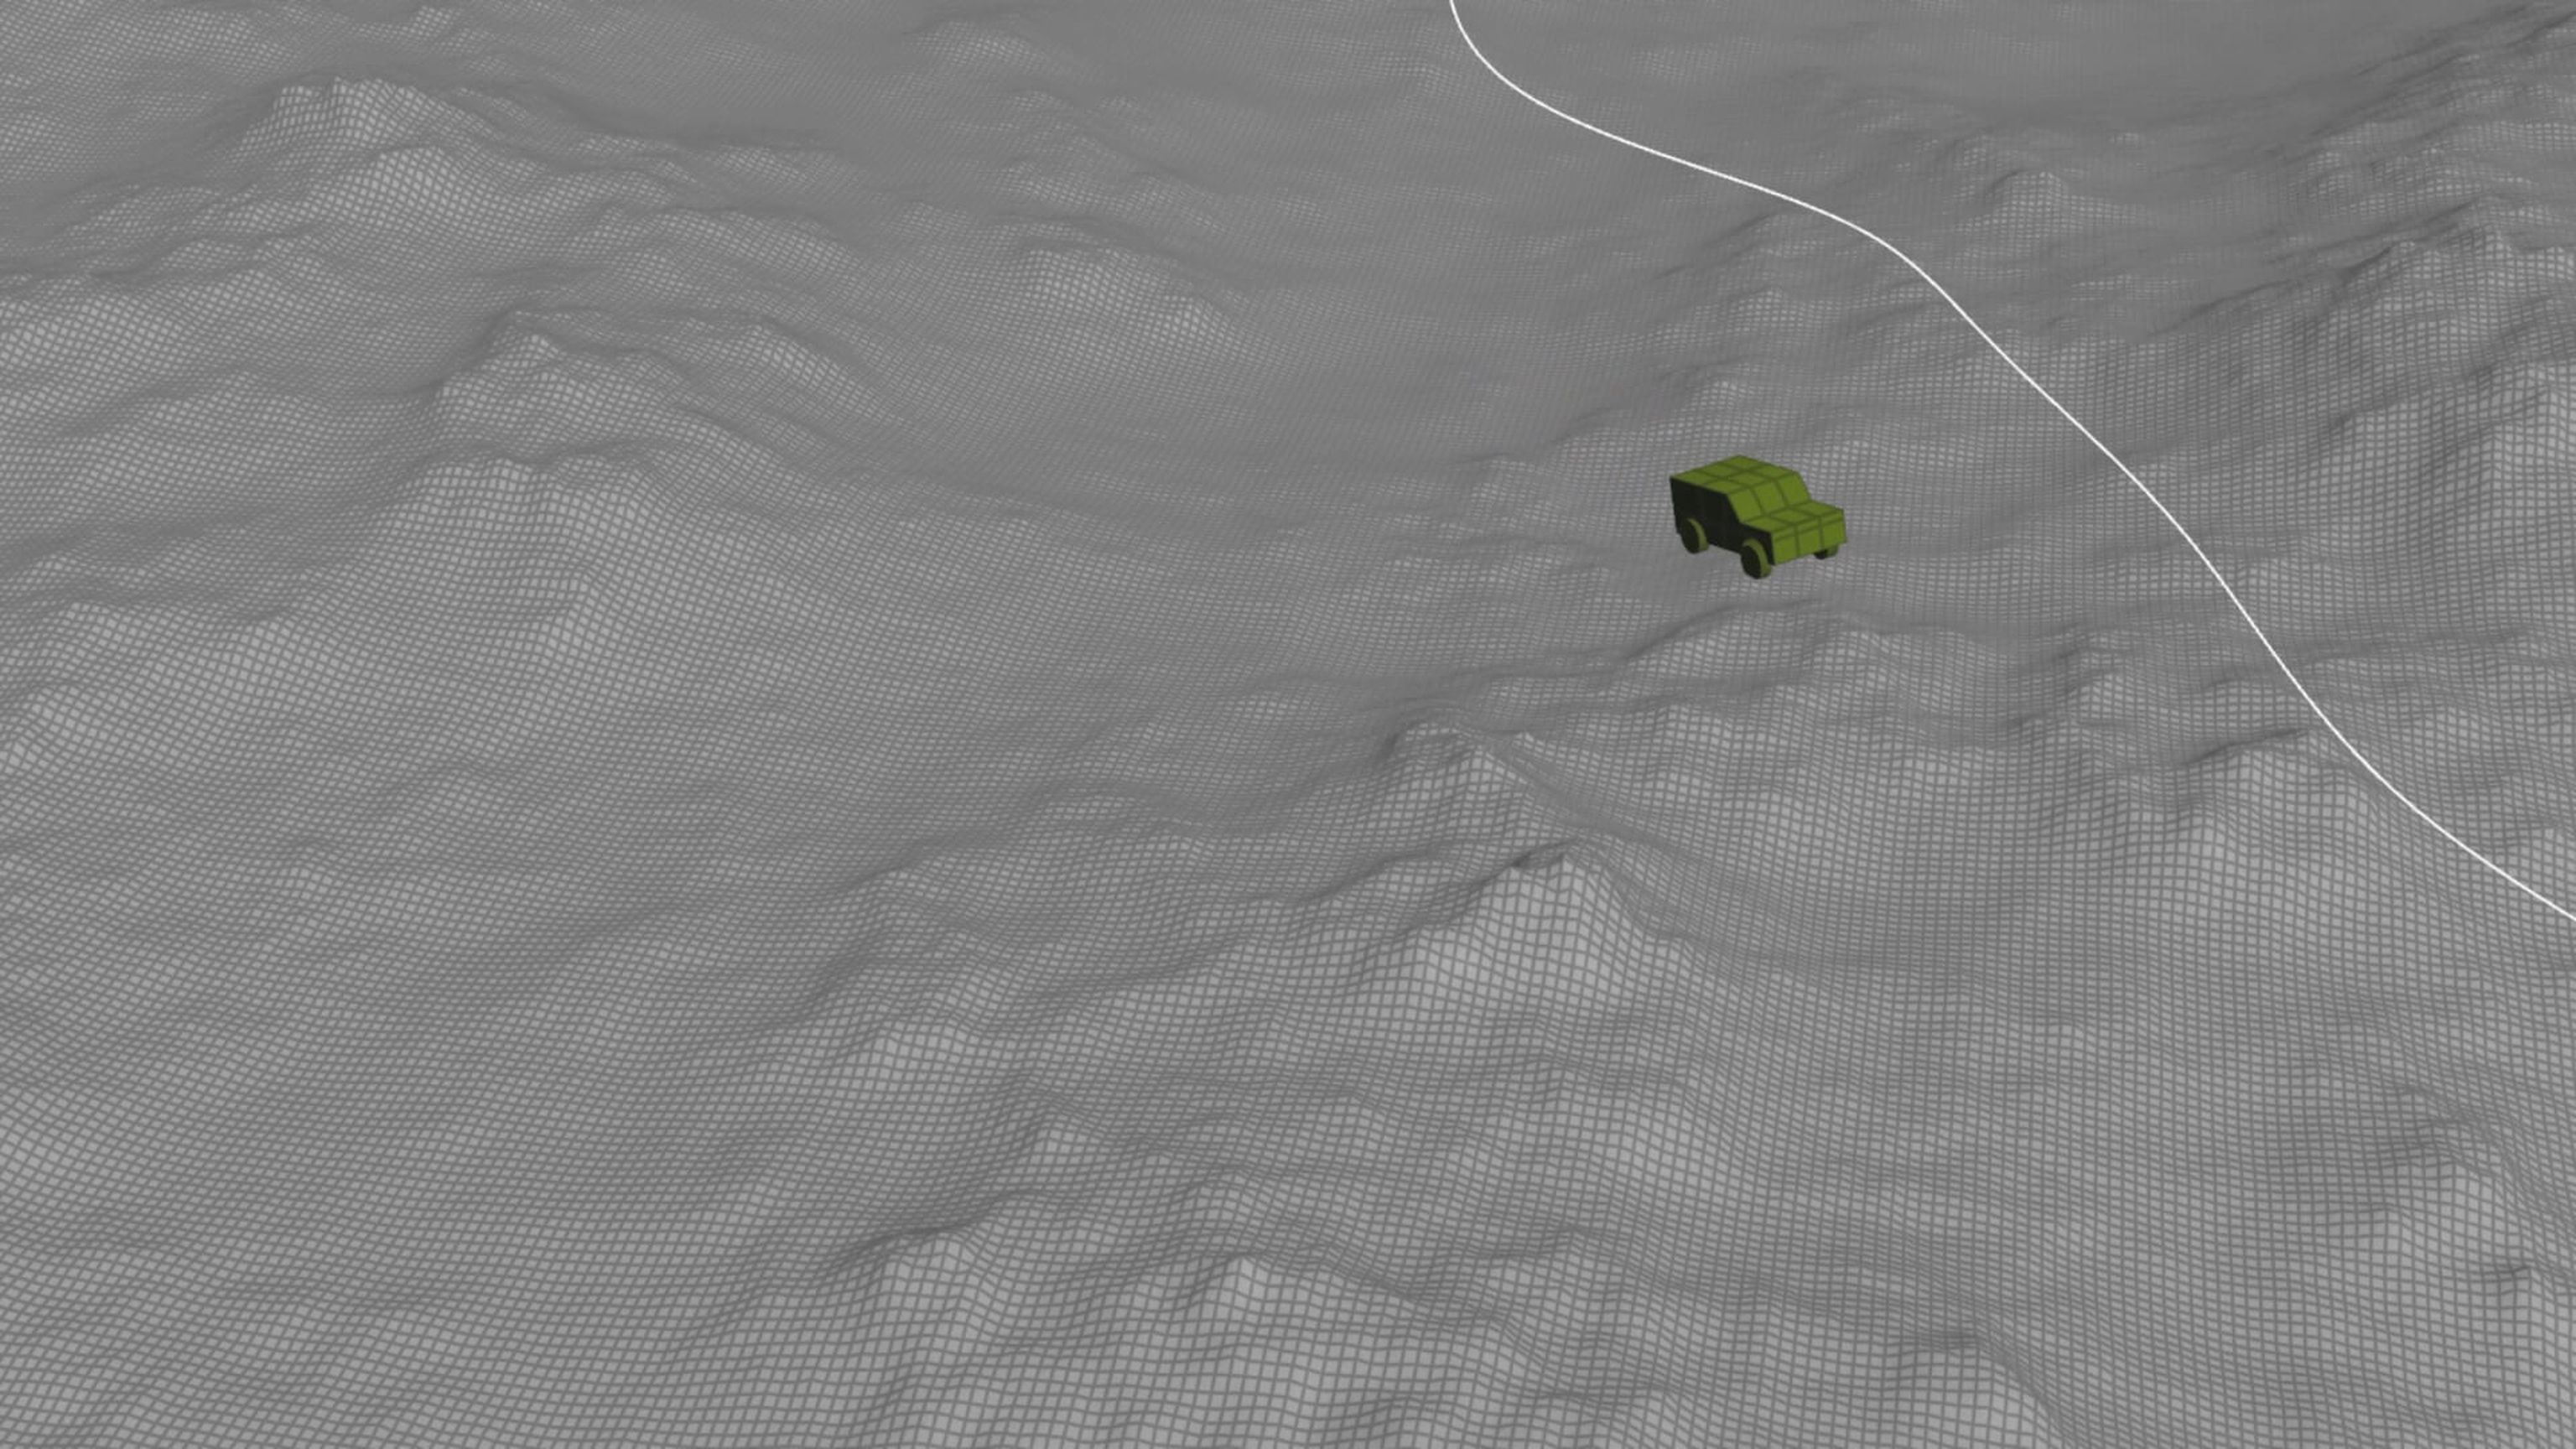 a screenshot of a tiny green vehicle crossing black and white animated terrain